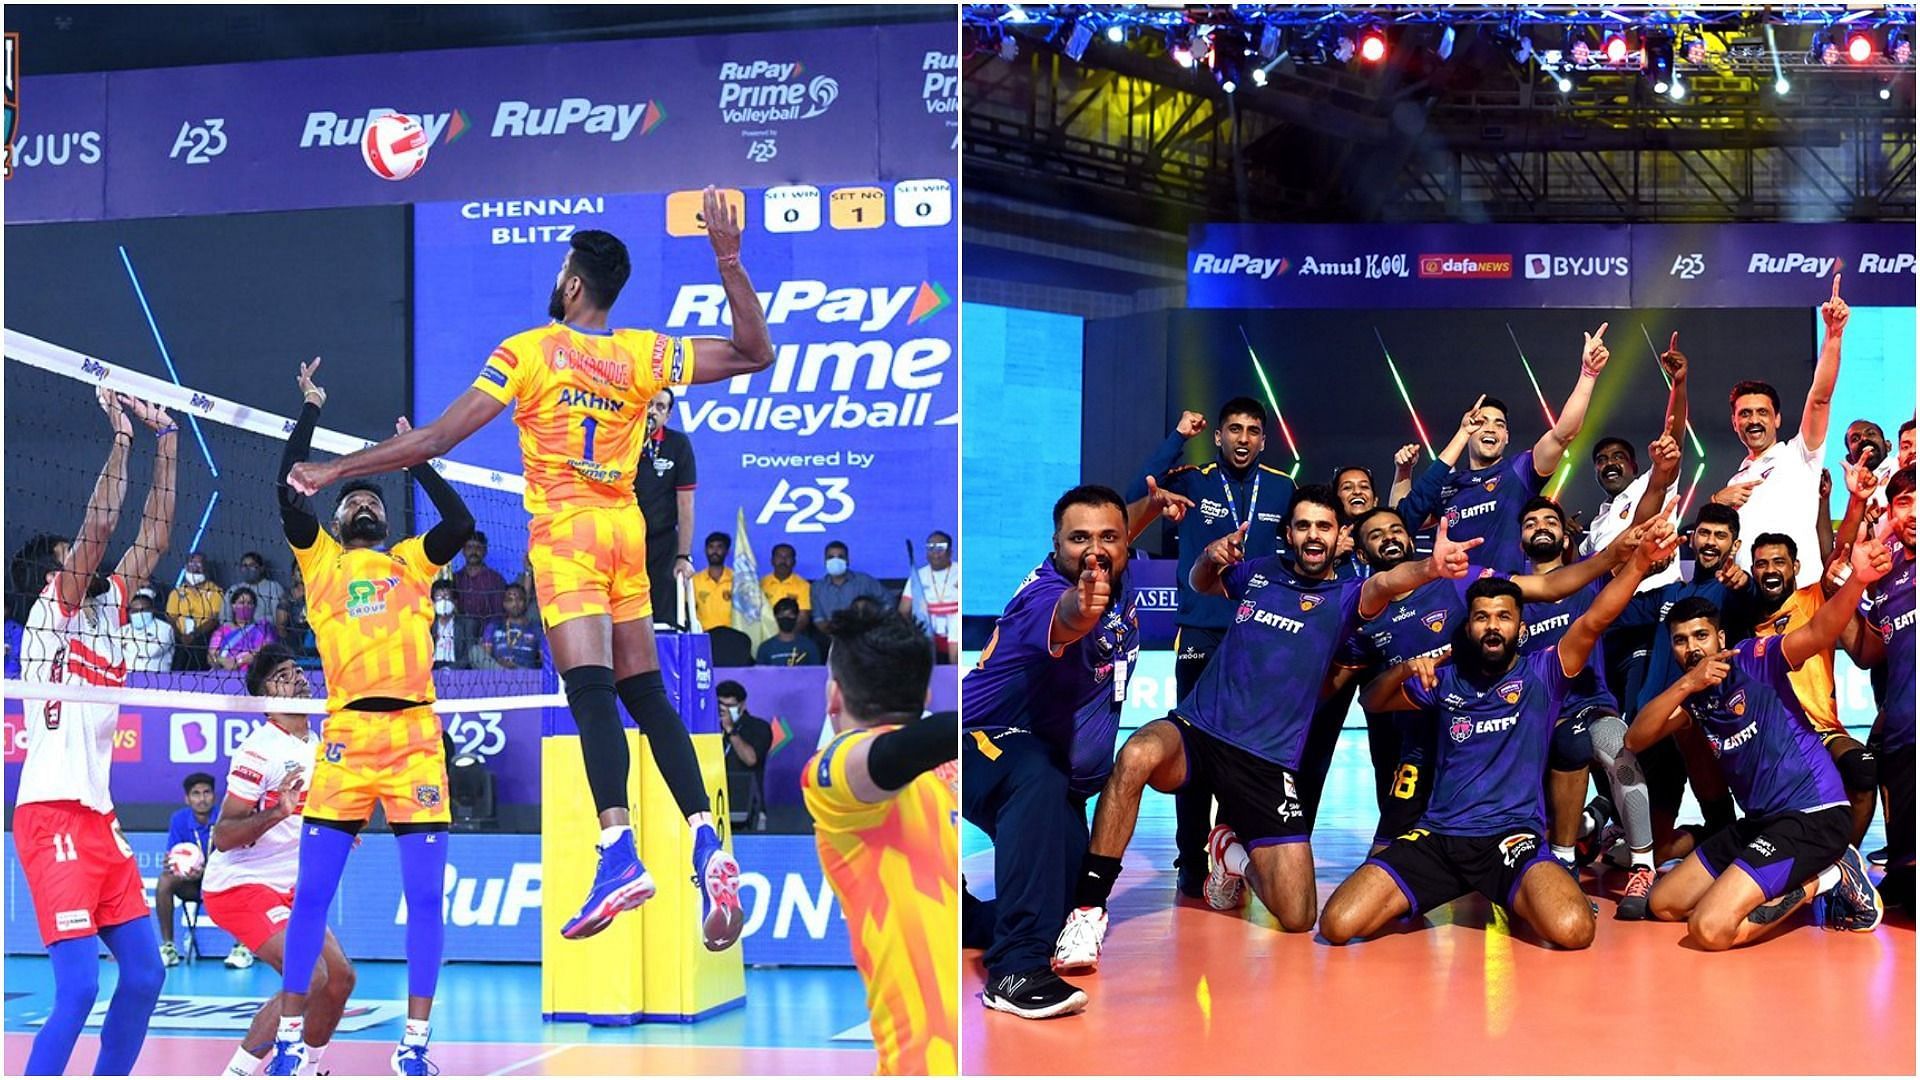 Chennai Blitz and Bengaluru Torpedoes in action during their previous matches (Pic Credit: PVL).